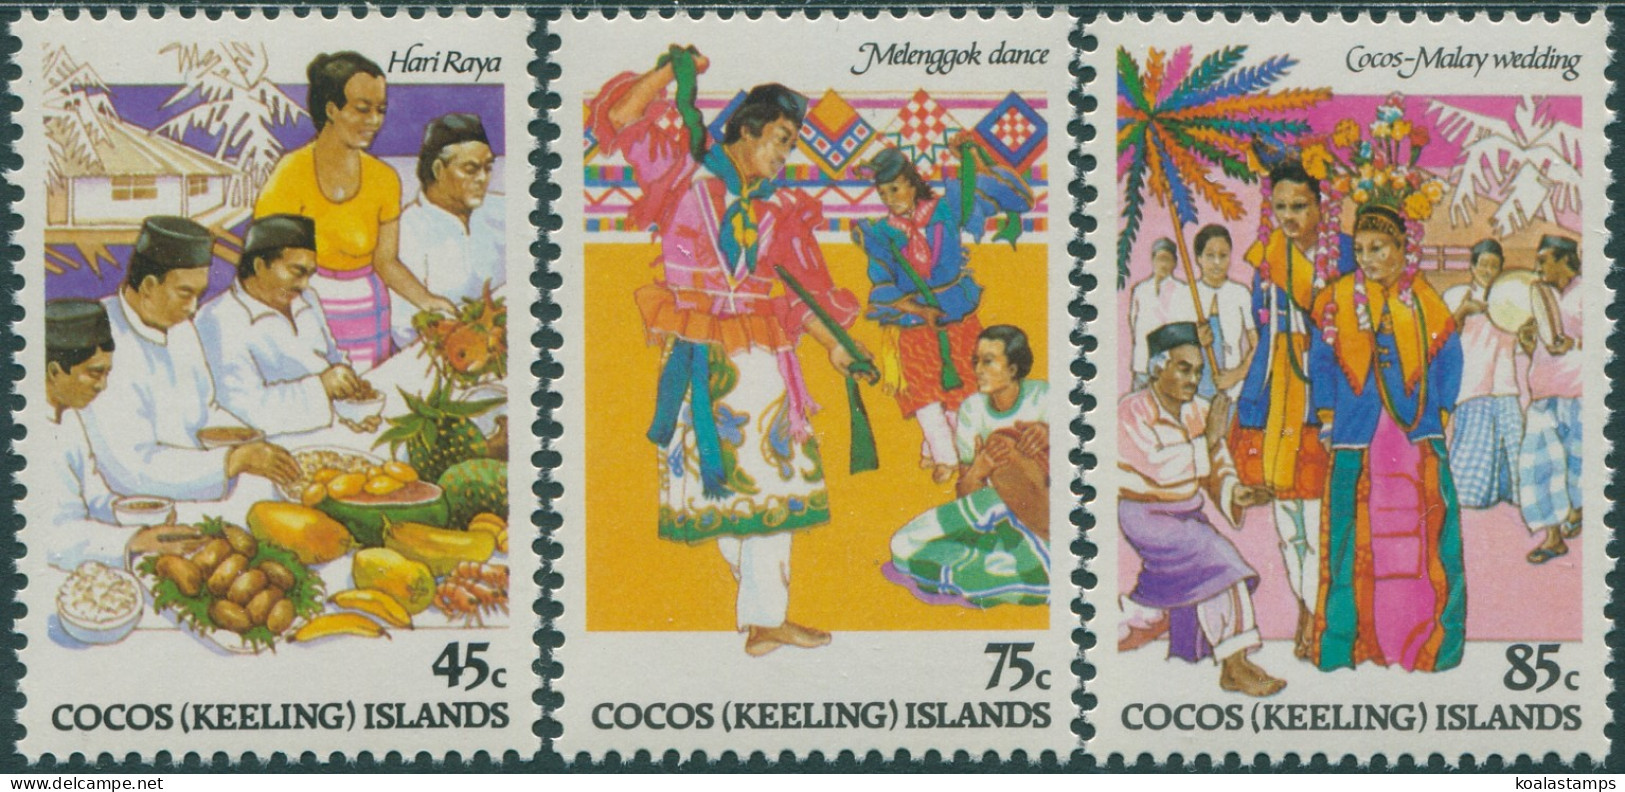 Cocos Islands 1984 SG108-110 Malay Culture Set MNH - Isole Cocos (Keeling)